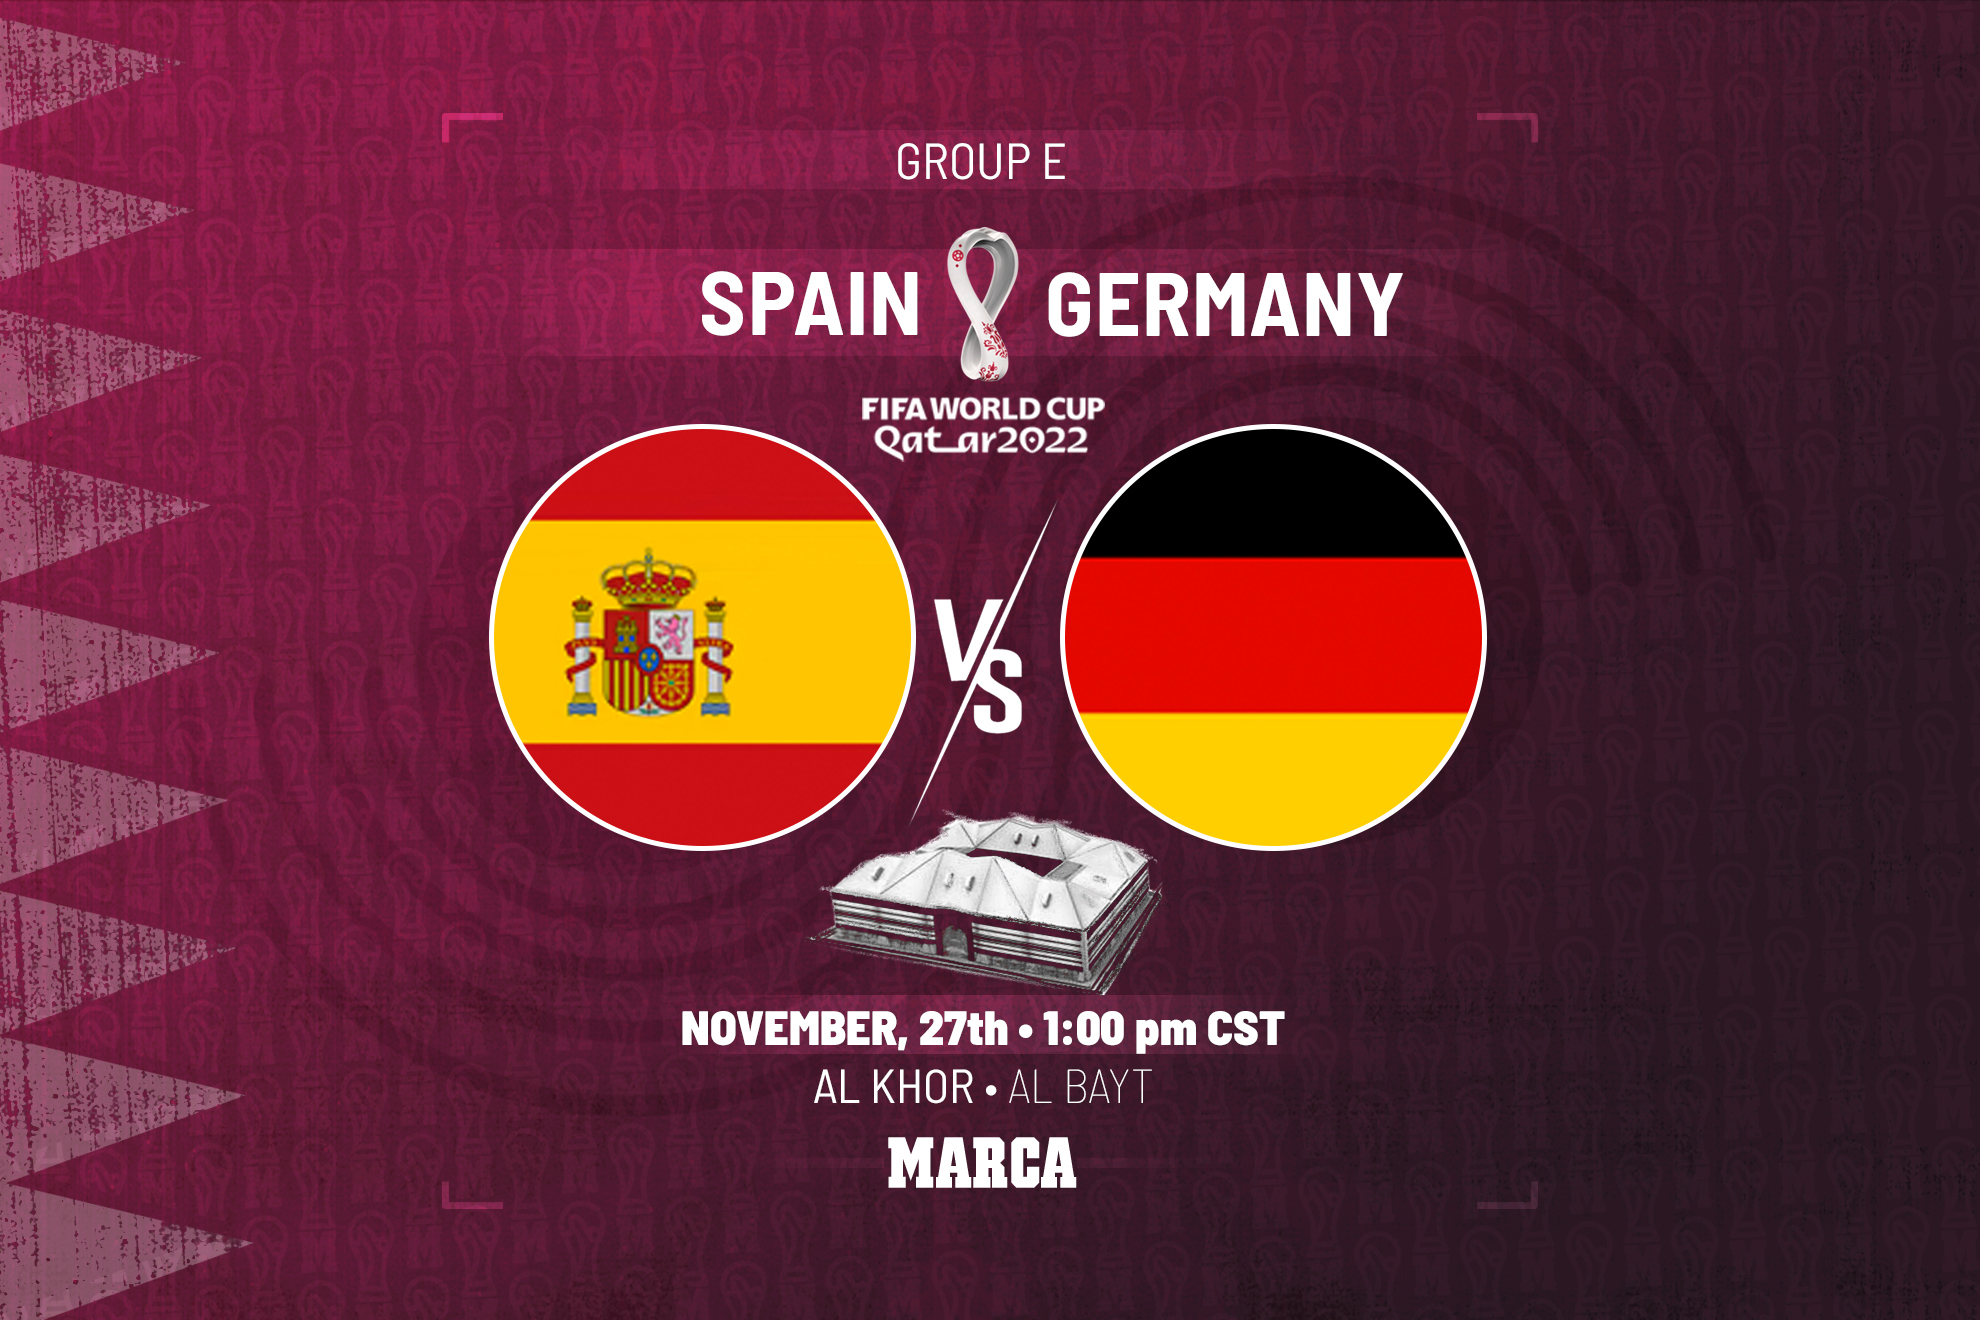 Spain - Germany Game Time